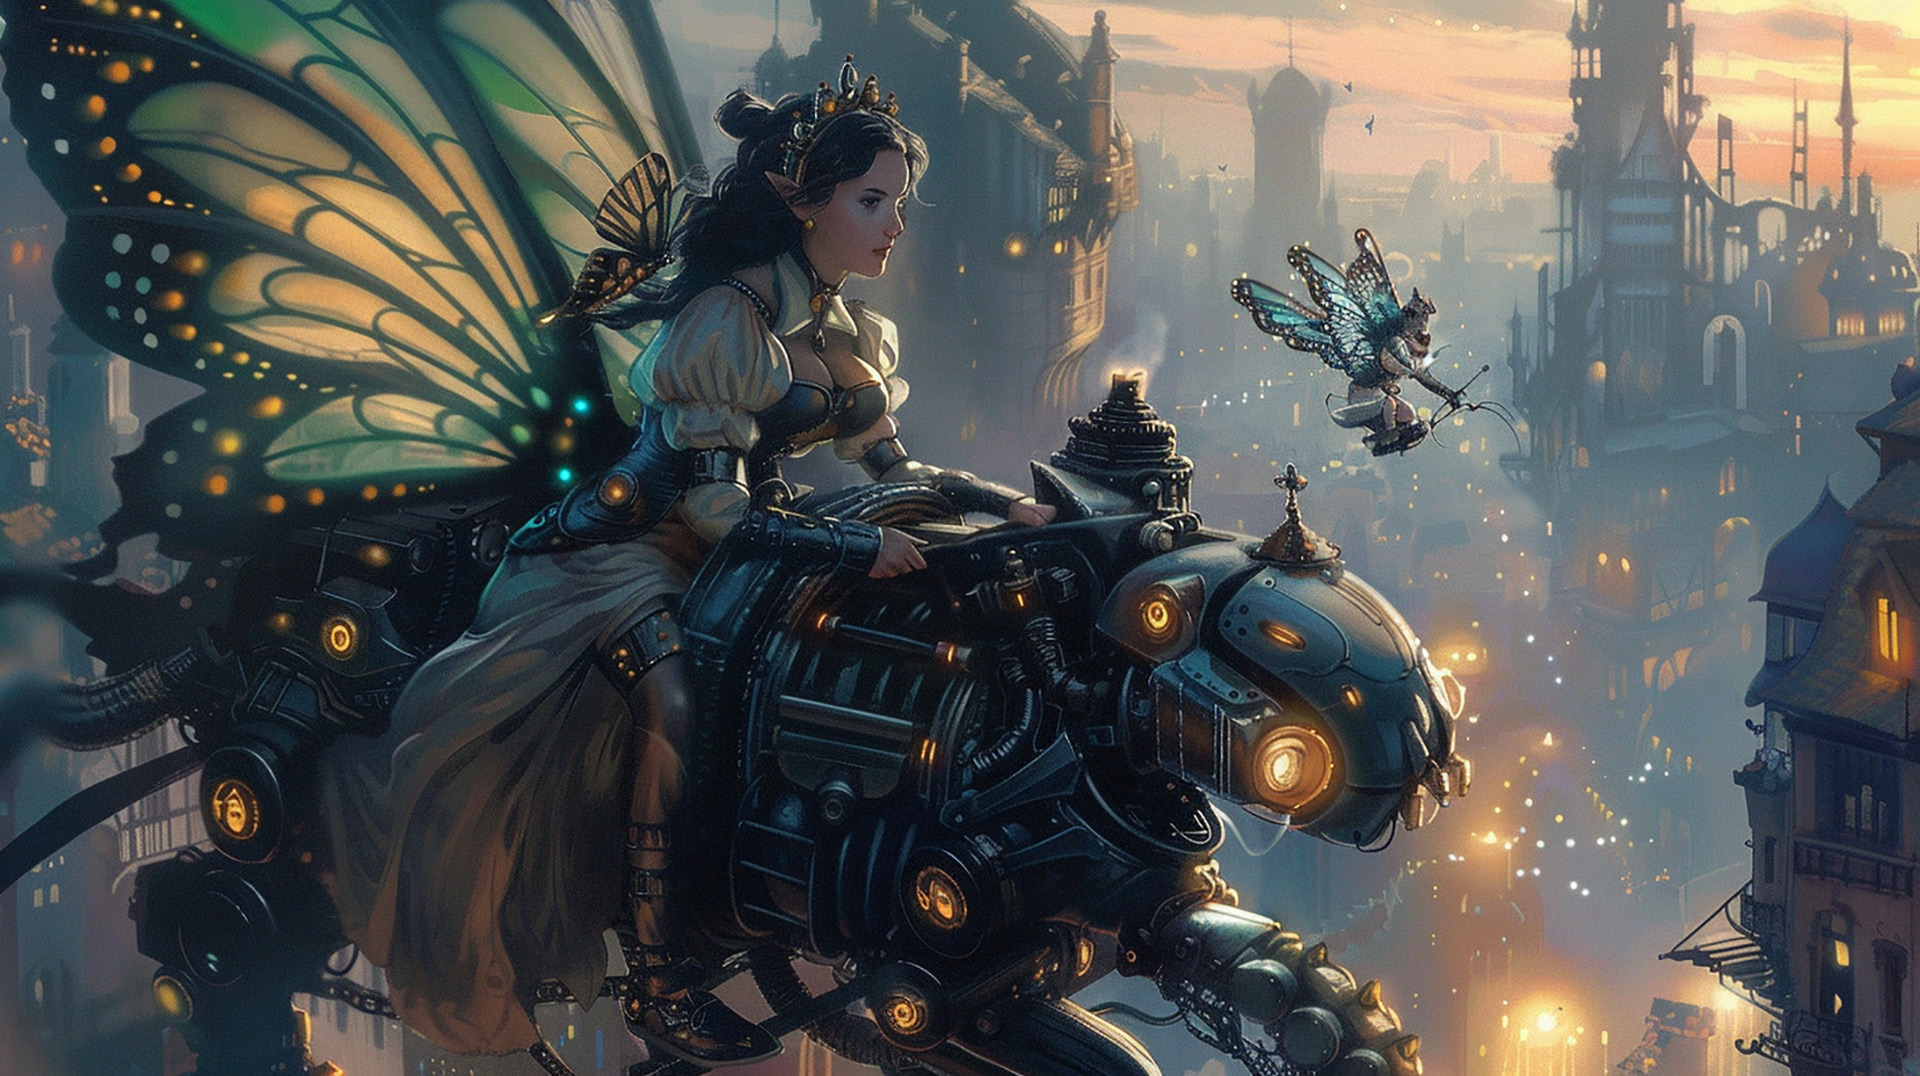 Magical Flight: Female Fairy and Robot Dog in the Skies